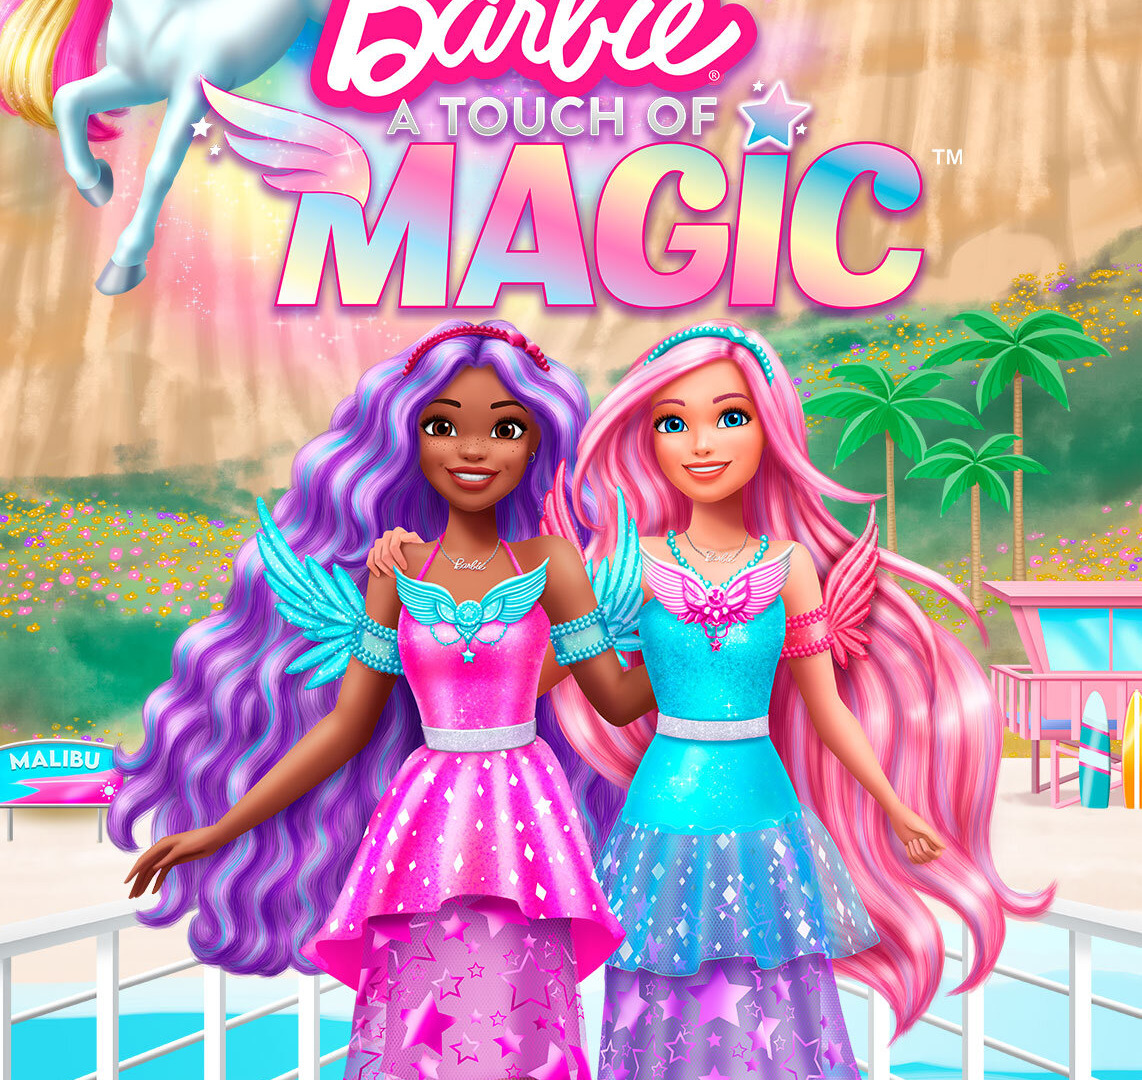 Show Barbie: A Touch of Magic